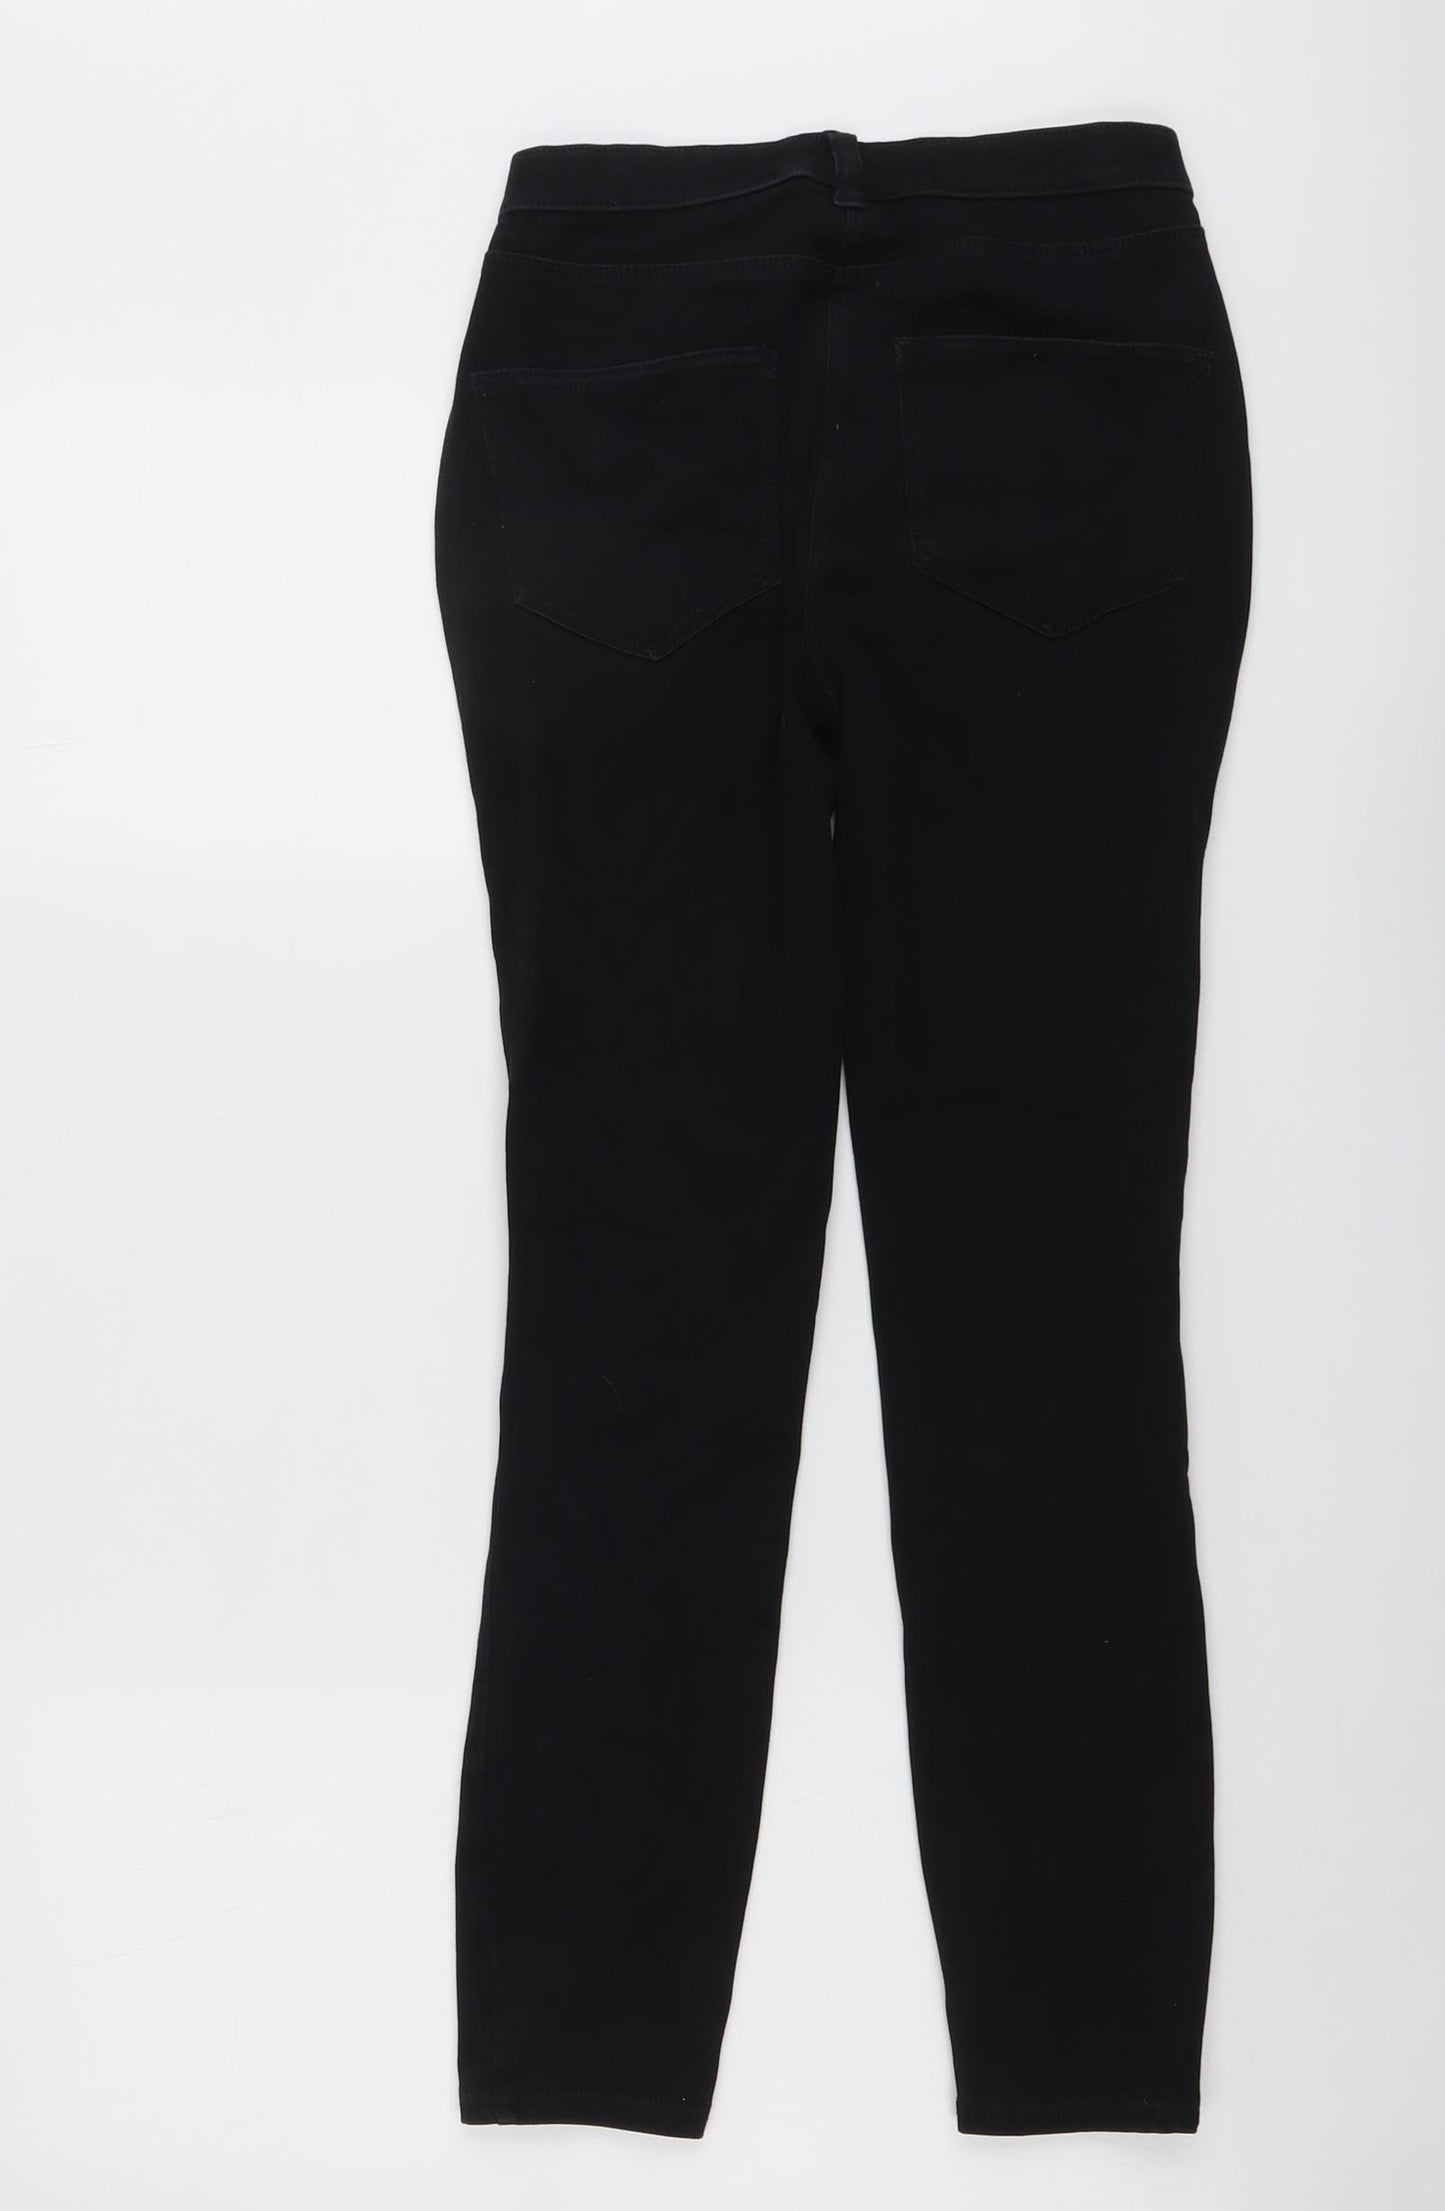 NEXT Womens Black Cotton Skinny Jeans Size 6 L26 in Regular Button